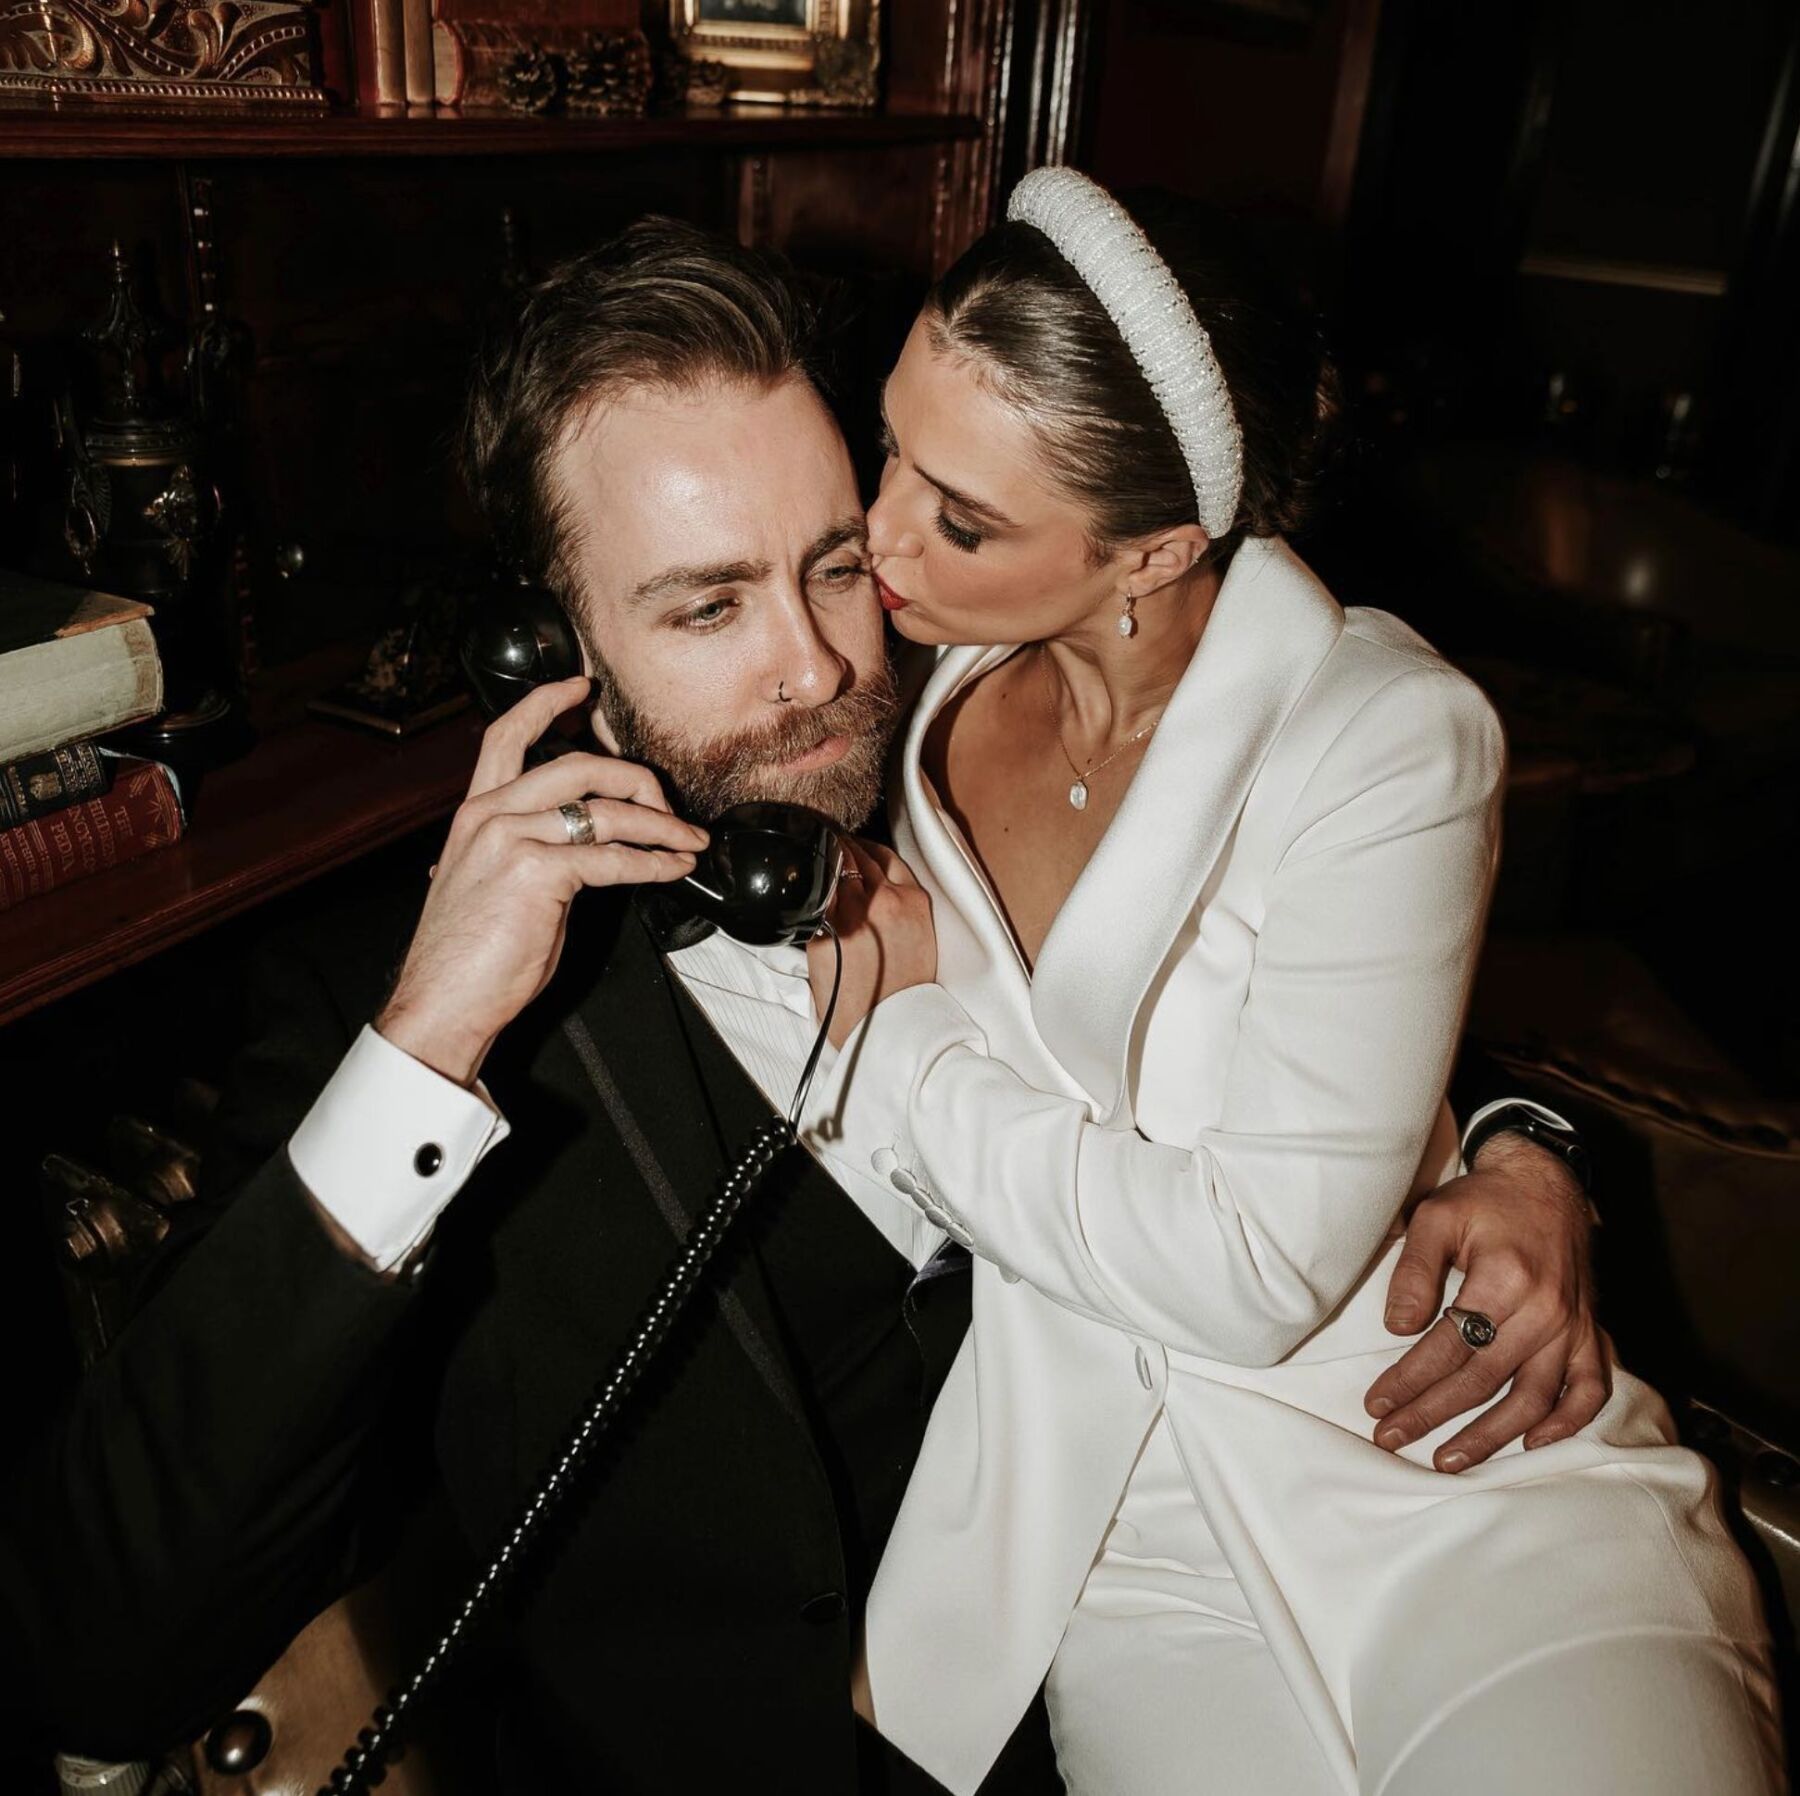 Modern bride and groom with a vintage telephone - CALLEO audio guest book